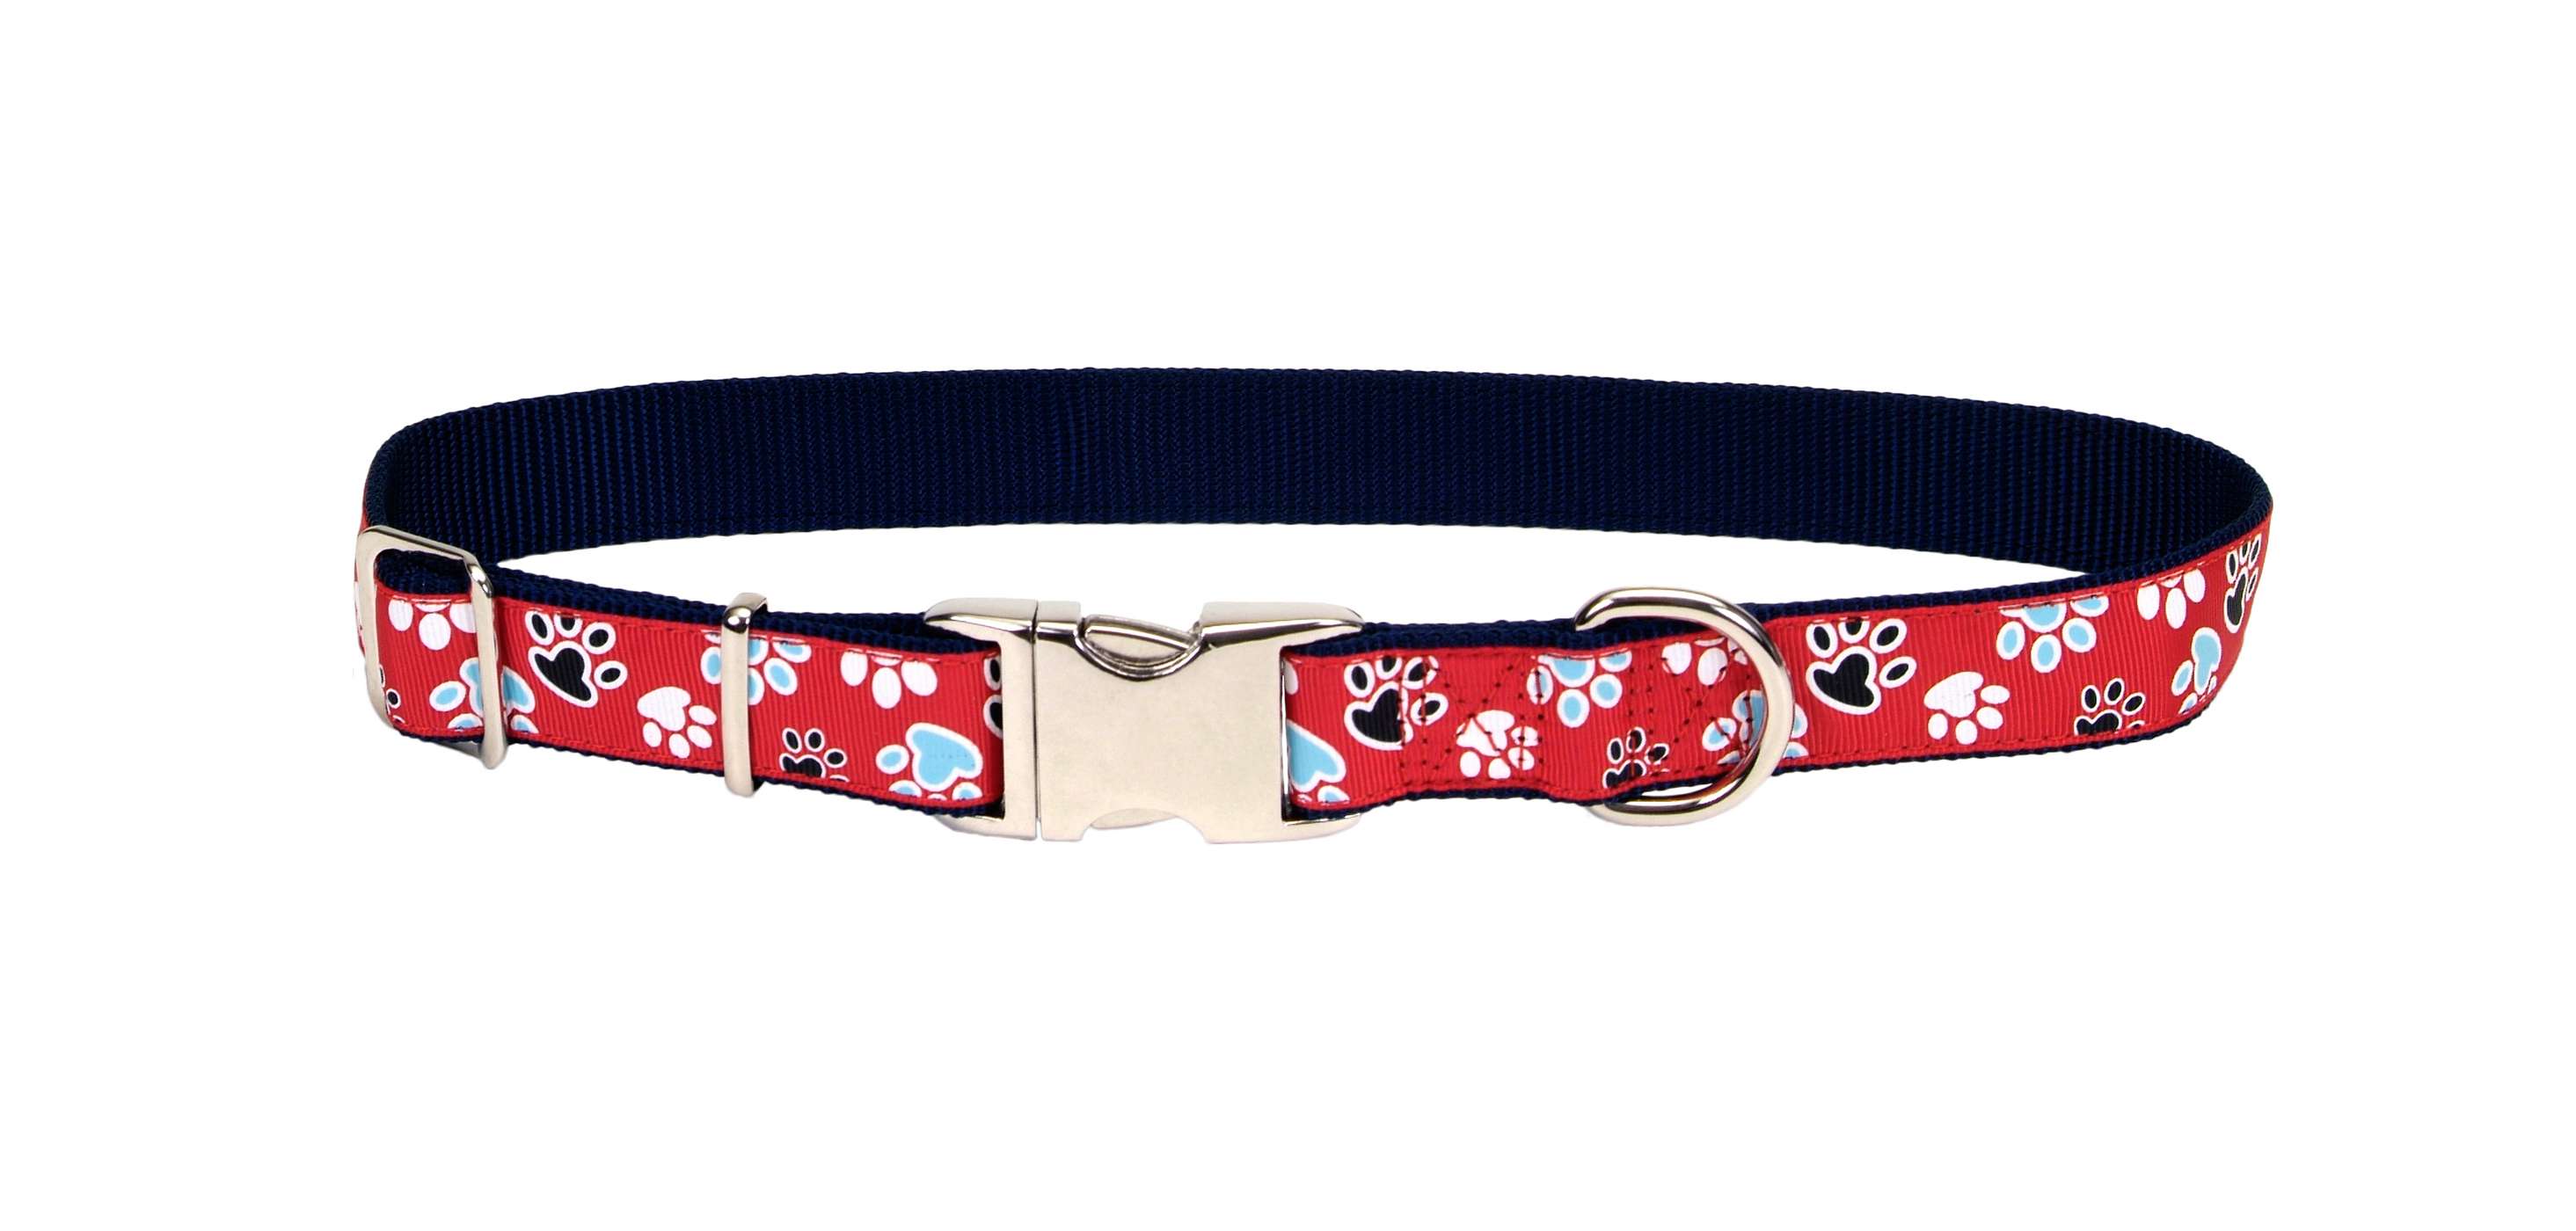 Coastal Pet Products 1 Inch Adjustable Nylon Collar with Red Paws Ribbon; image 2 of 2